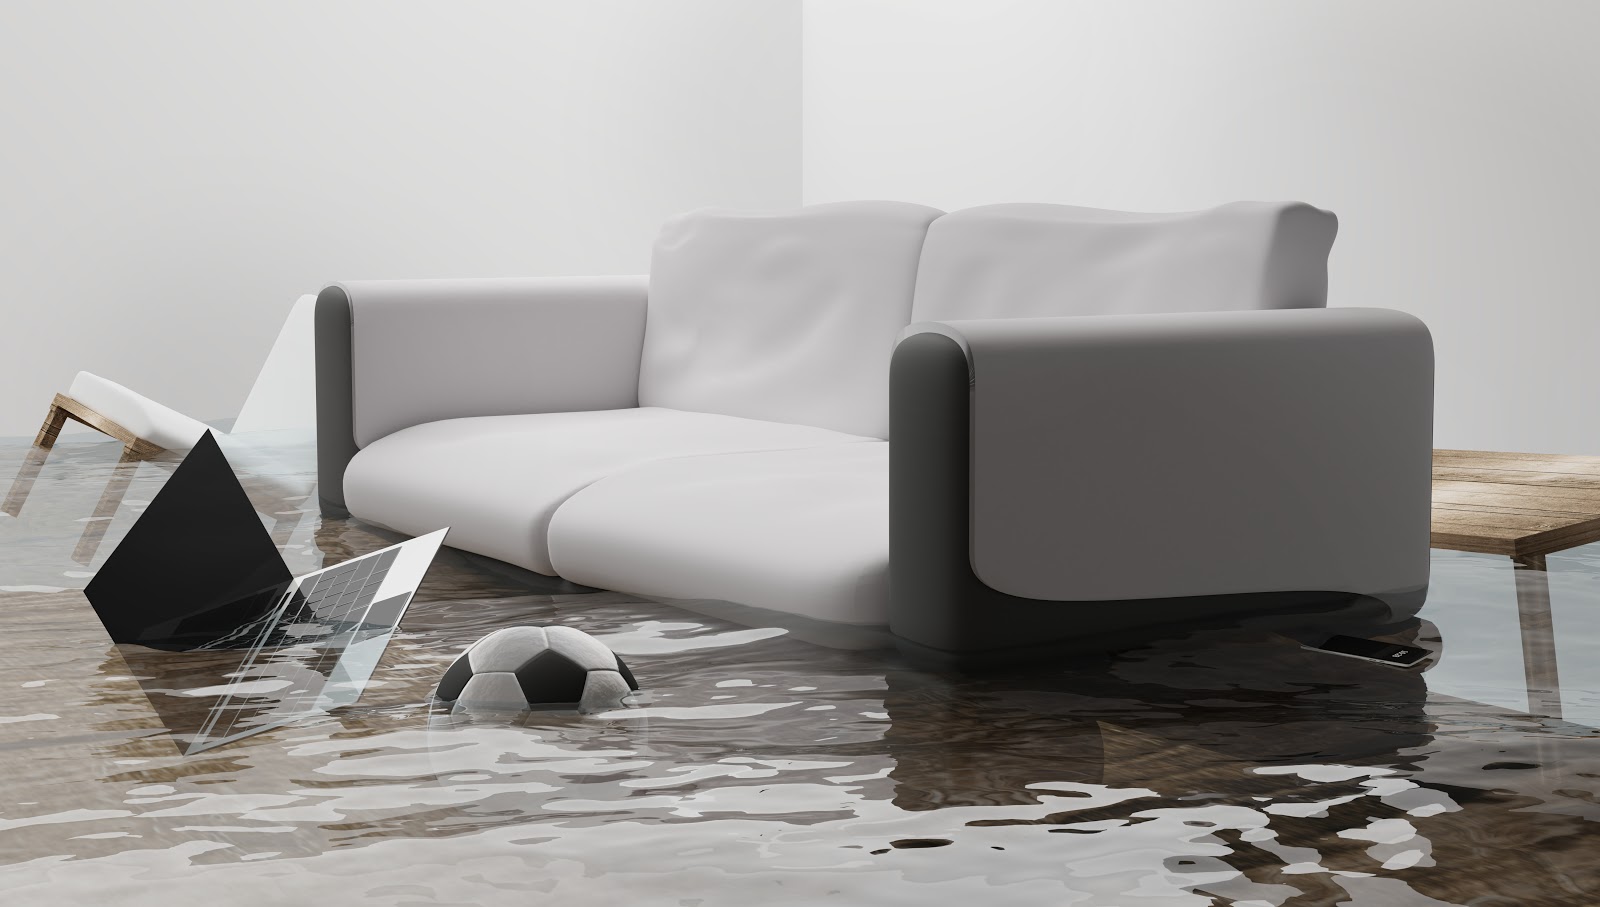 3 Questions to Ask Before  Water Damage Restoration